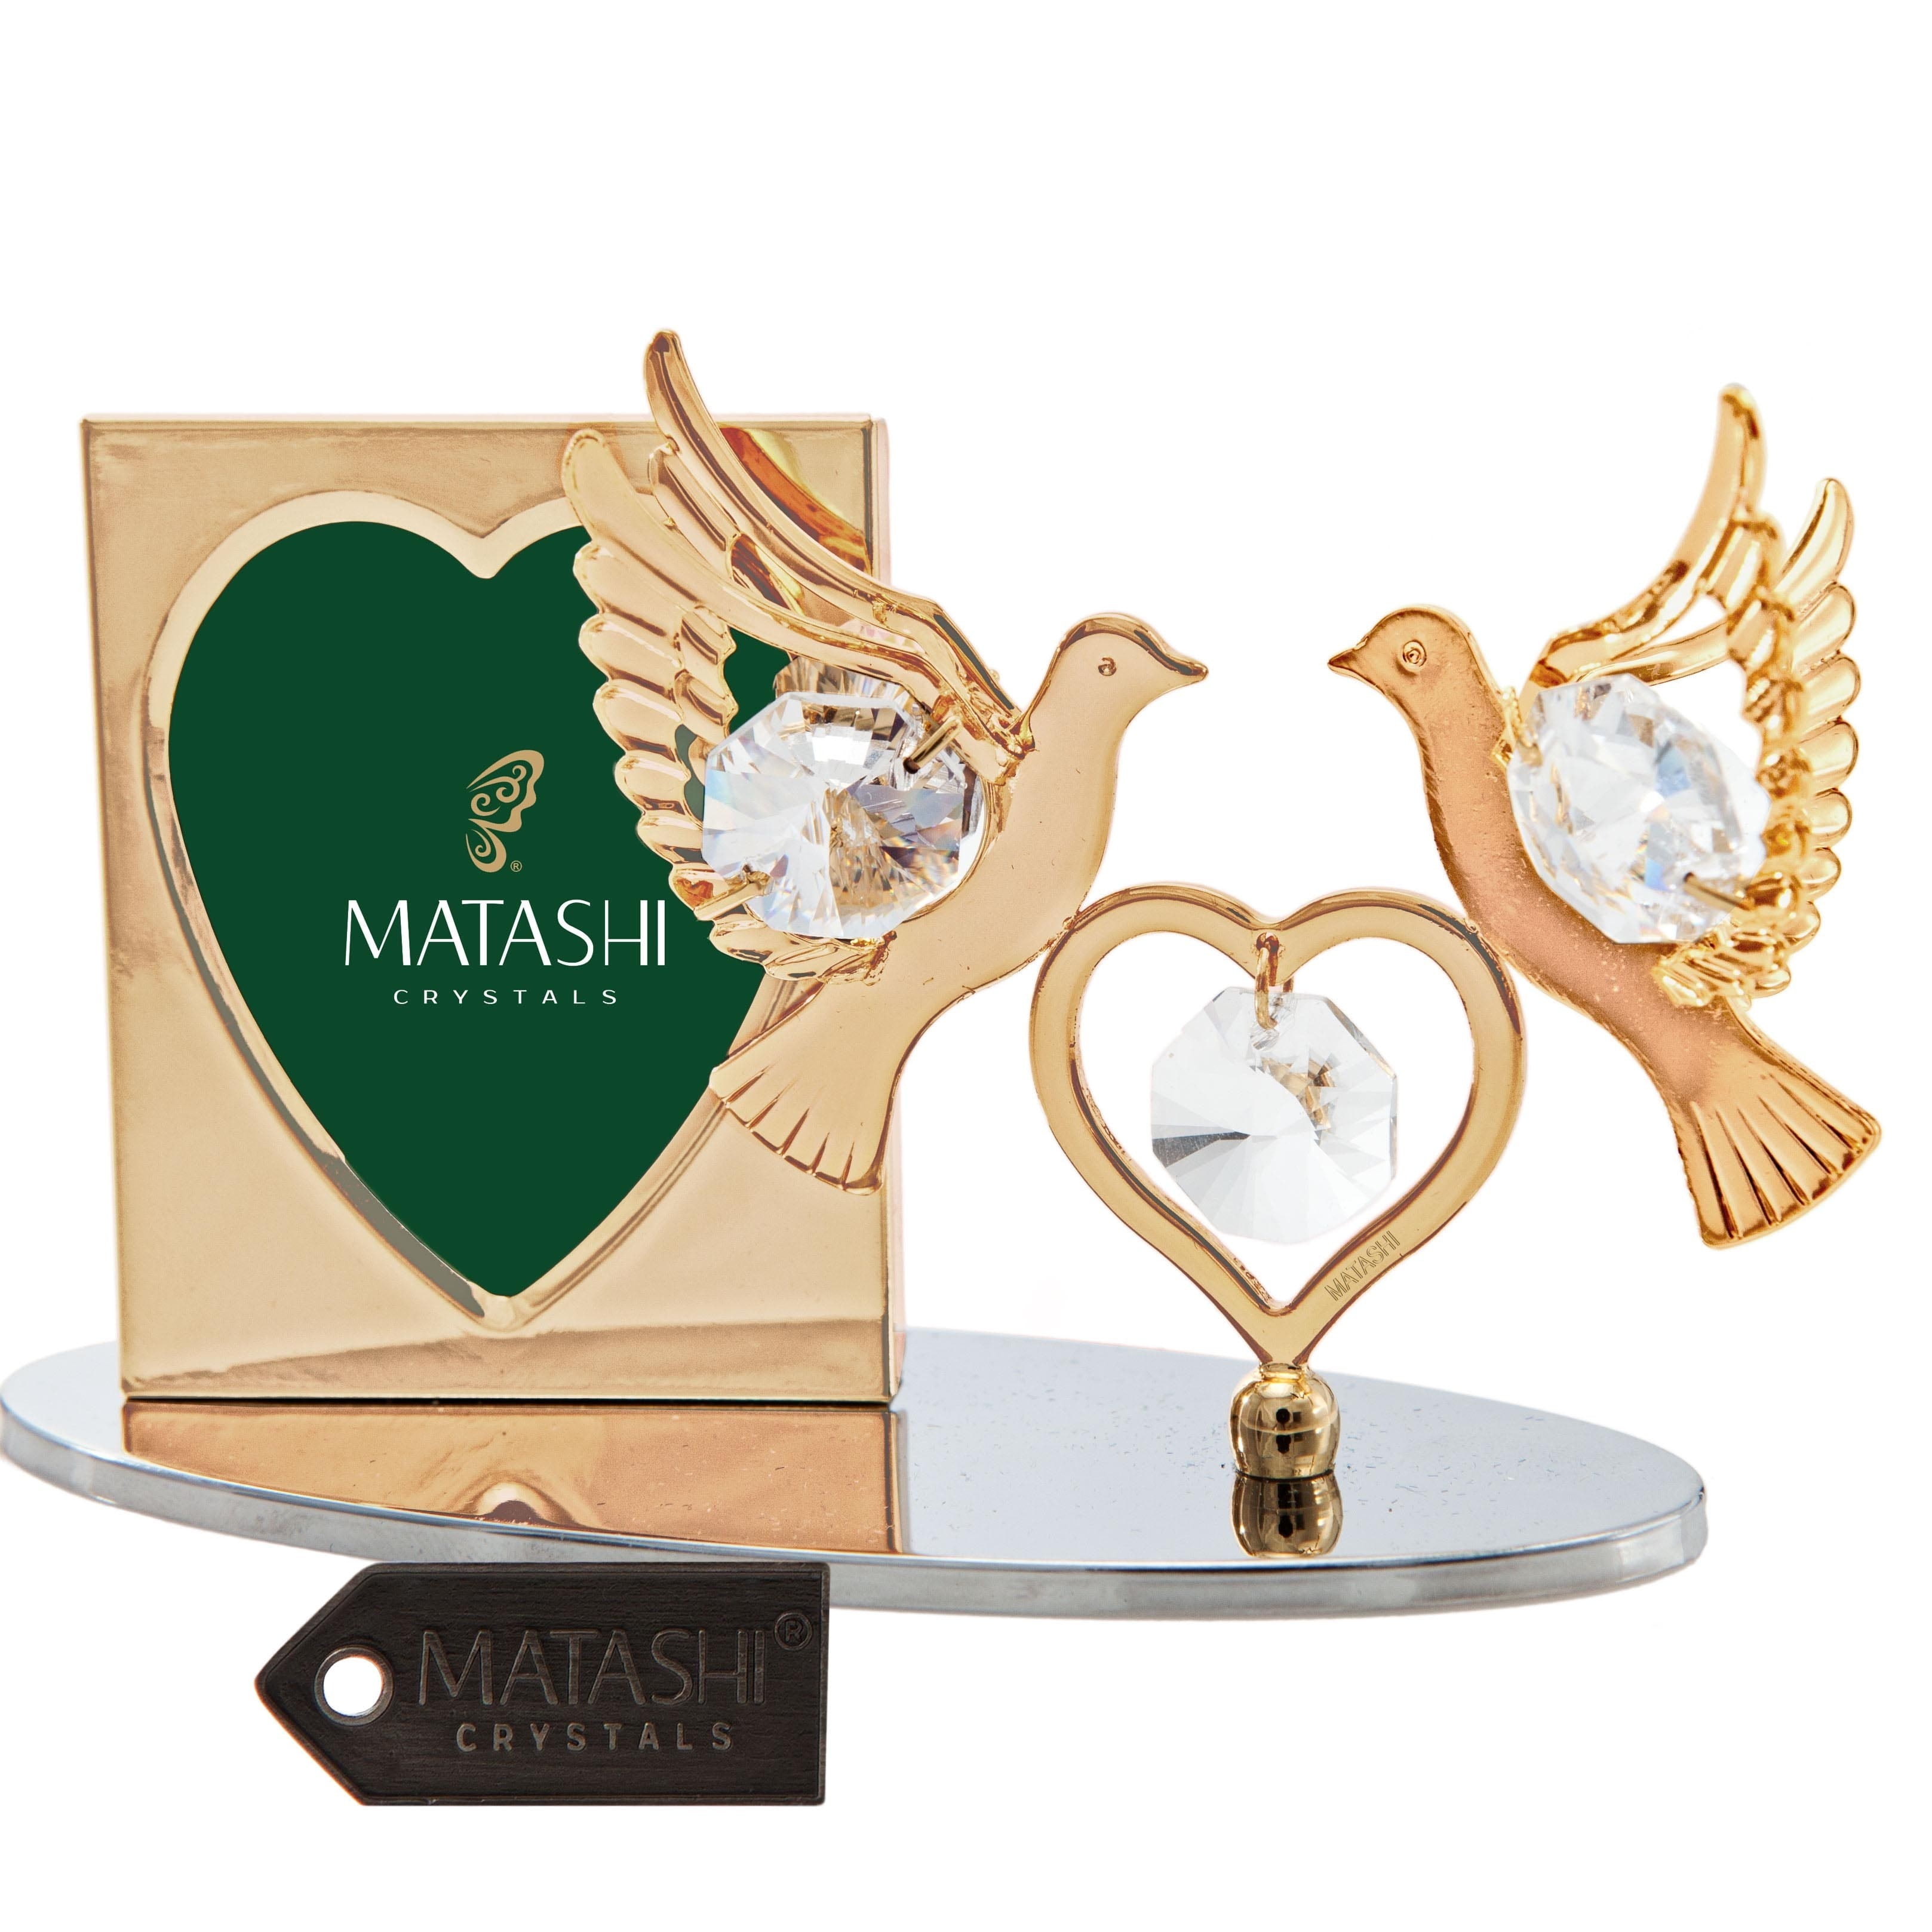 Matashi Crystal 2 Piece Crystal Decorated Double Dove Figurine and ...